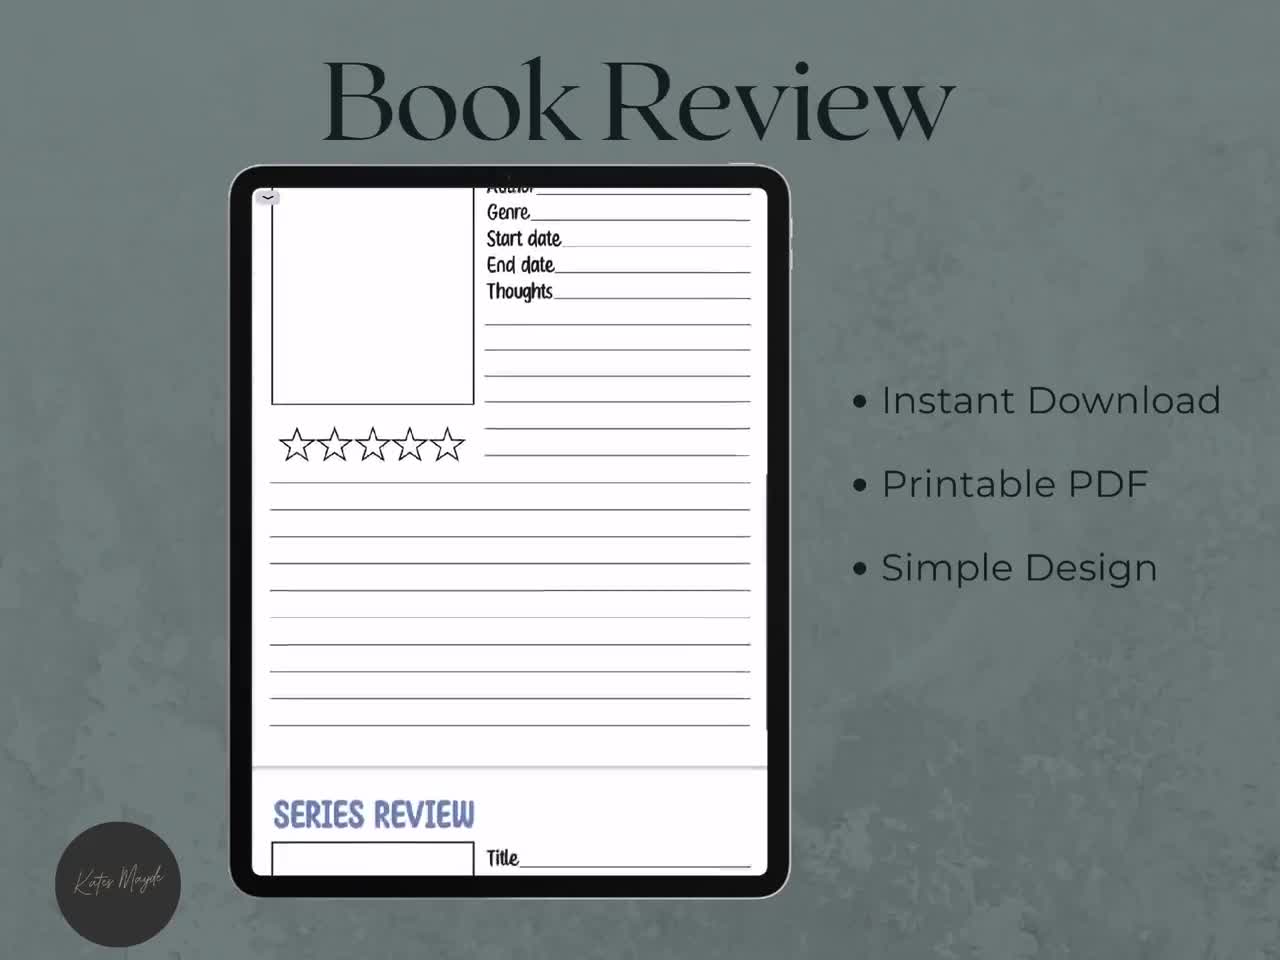 Book Review Blue - Notability Gallery